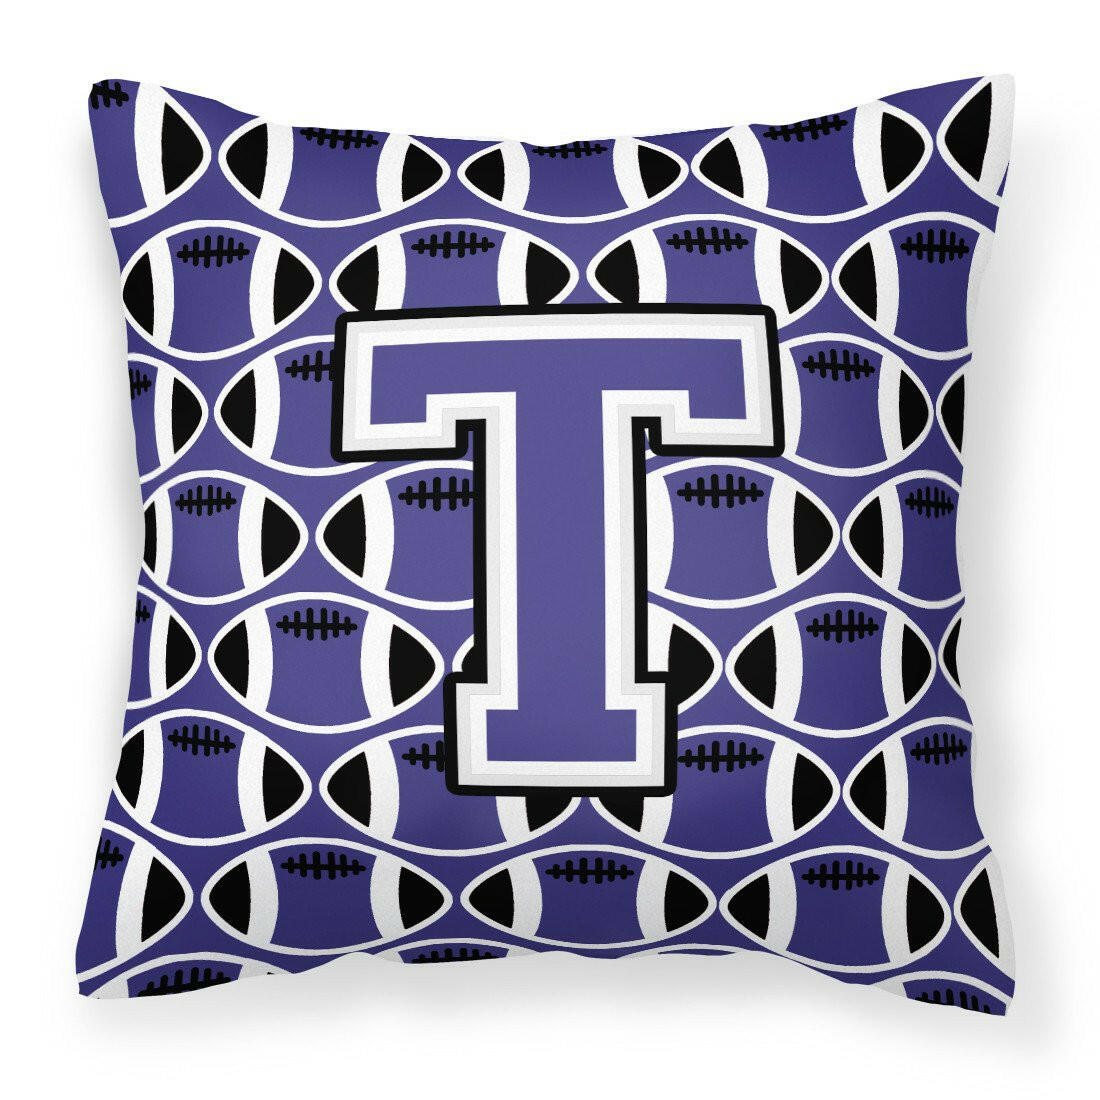 Letter T Football Purple and White Fabric Decorative Pillow CJ1068-TPW1414 by Caroline's Treasures